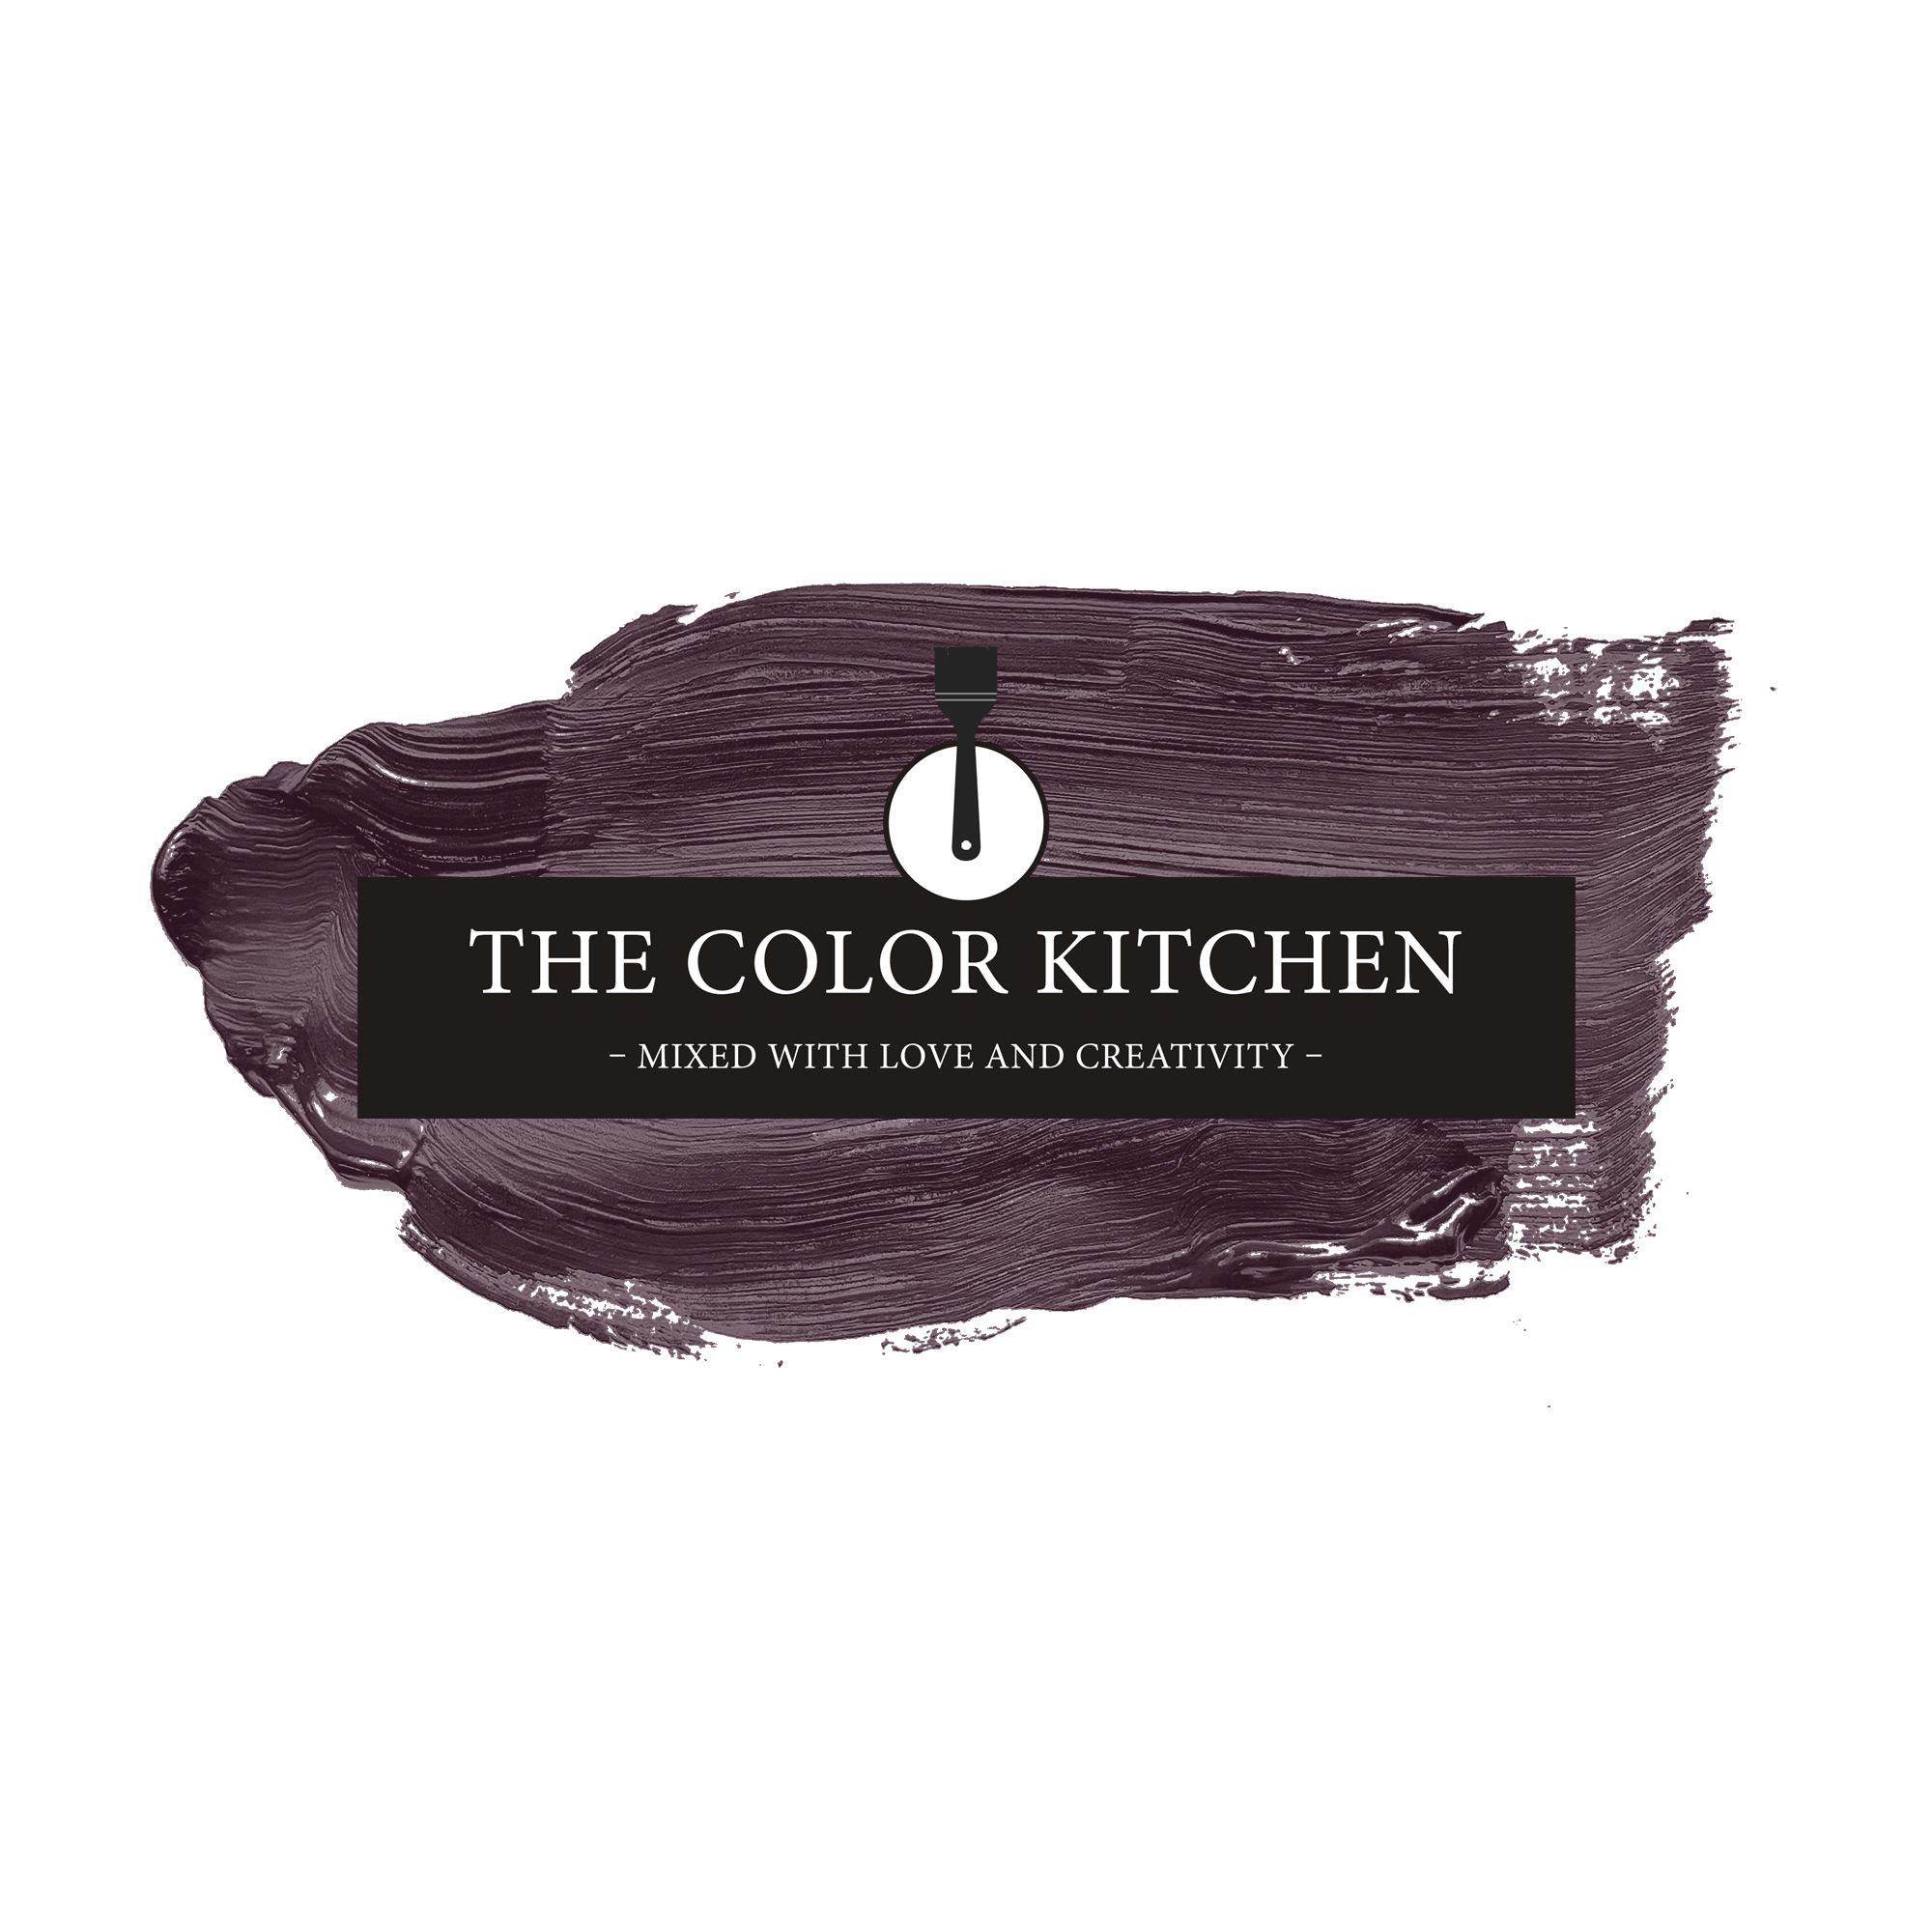 The Color Kitchen Beady Beetroot 2,5 l